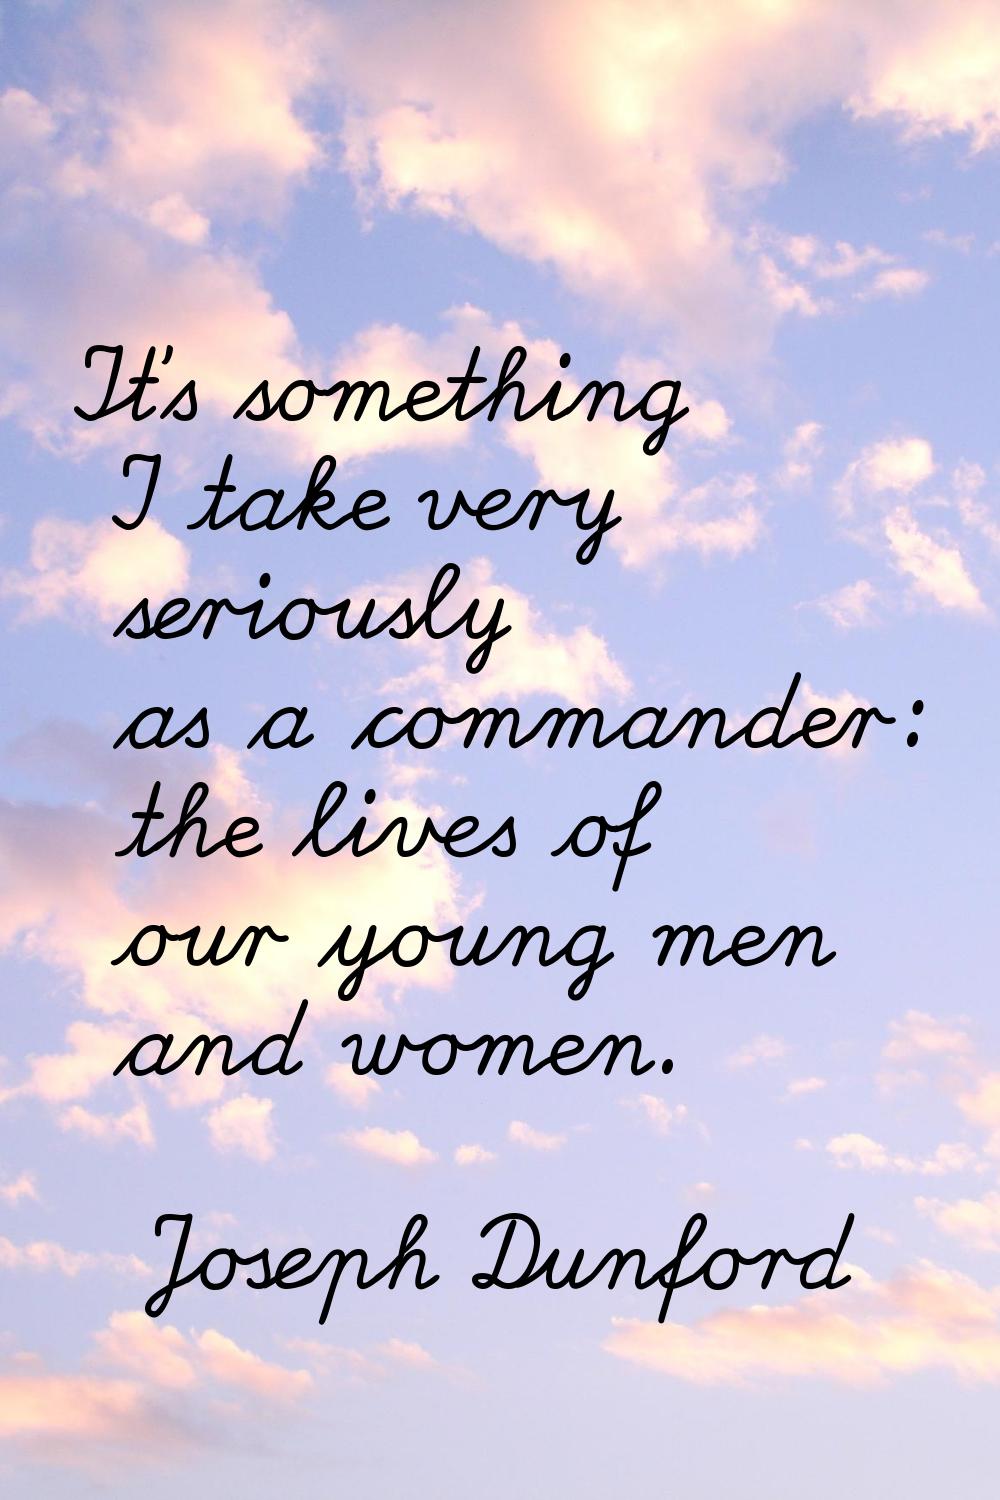 It's something I take very seriously as a commander: the lives of our young men and women.